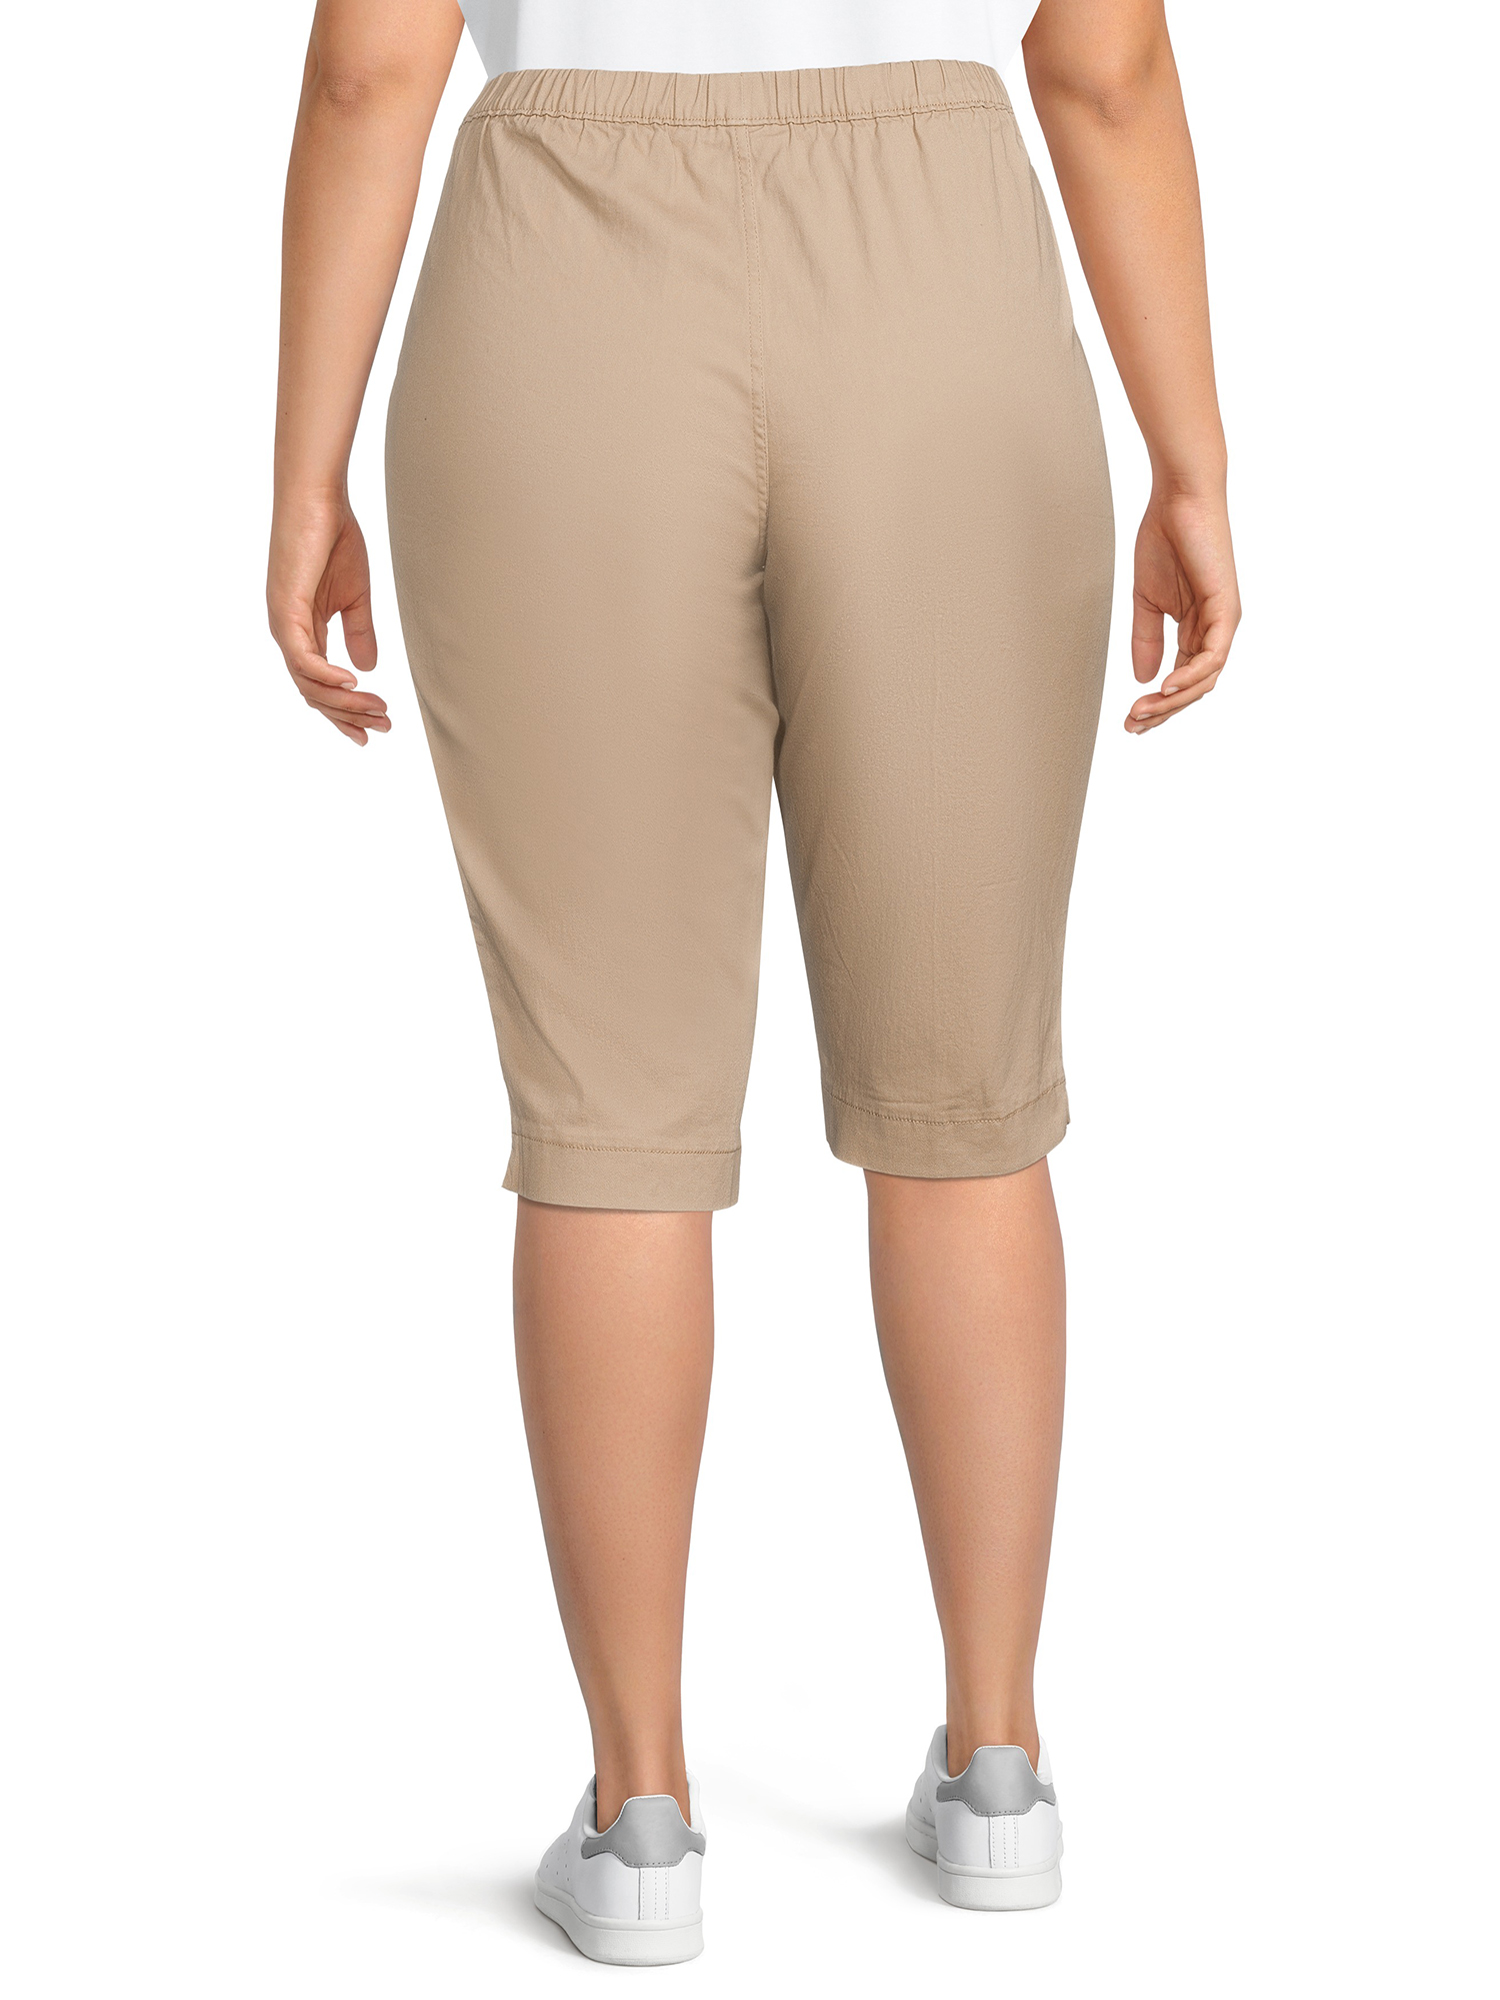 Just My Size Women's Plus Size Pull On 2 Pocket Stretch Capri - image 4 of 6